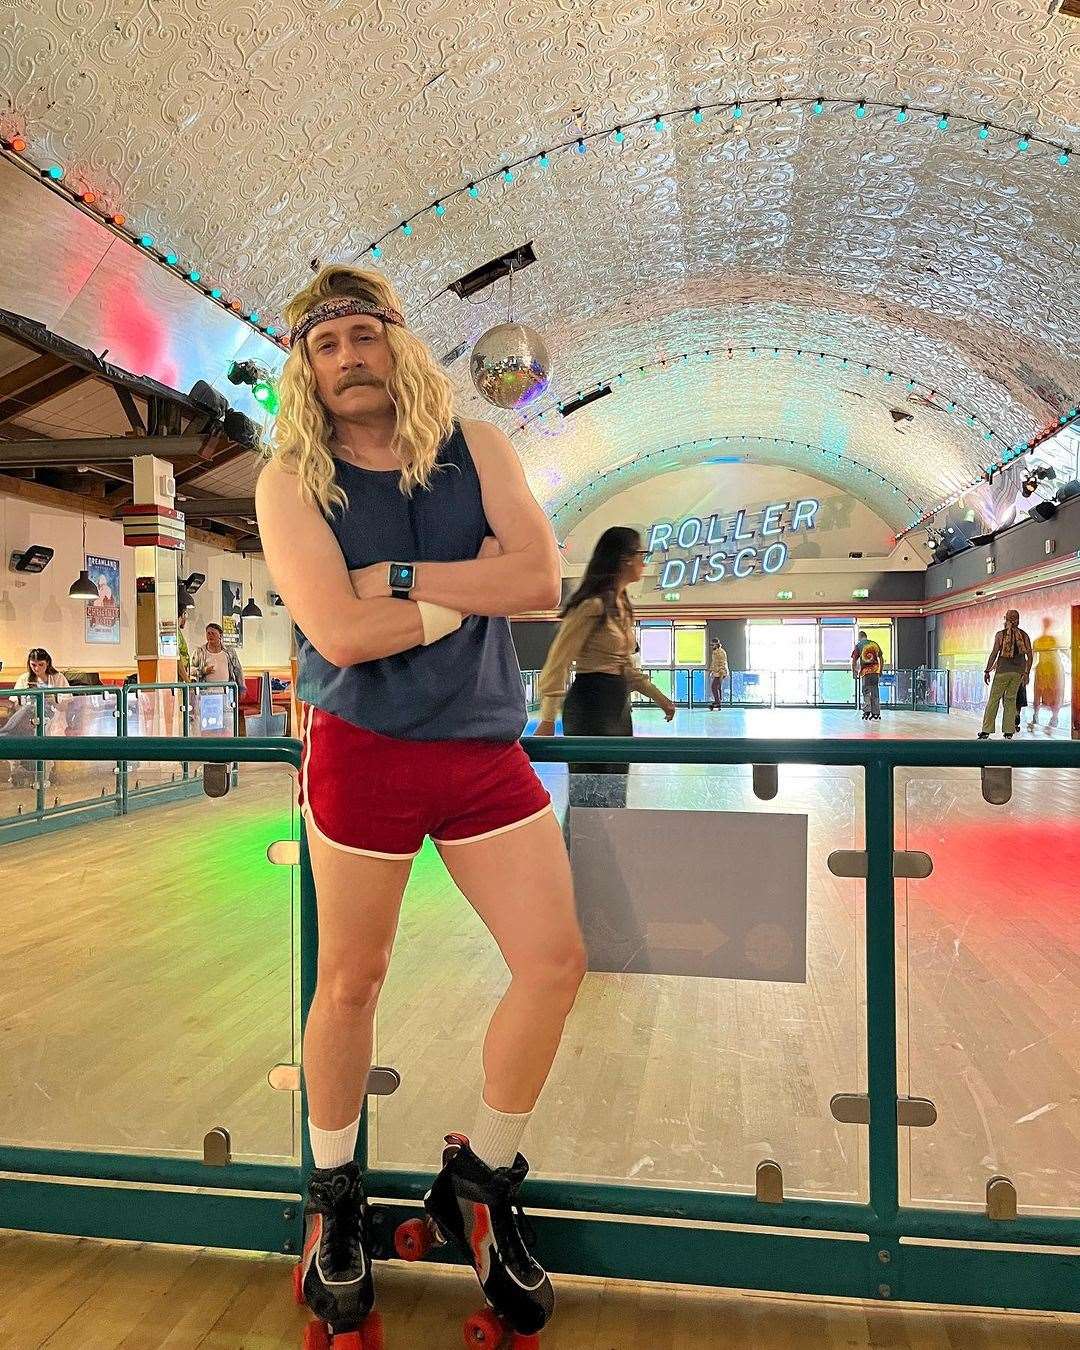 Buffy the Vampire Slayer star Tommy Lenk visits Dreamland’s roller disco. Picture: tommylenk/Instagram